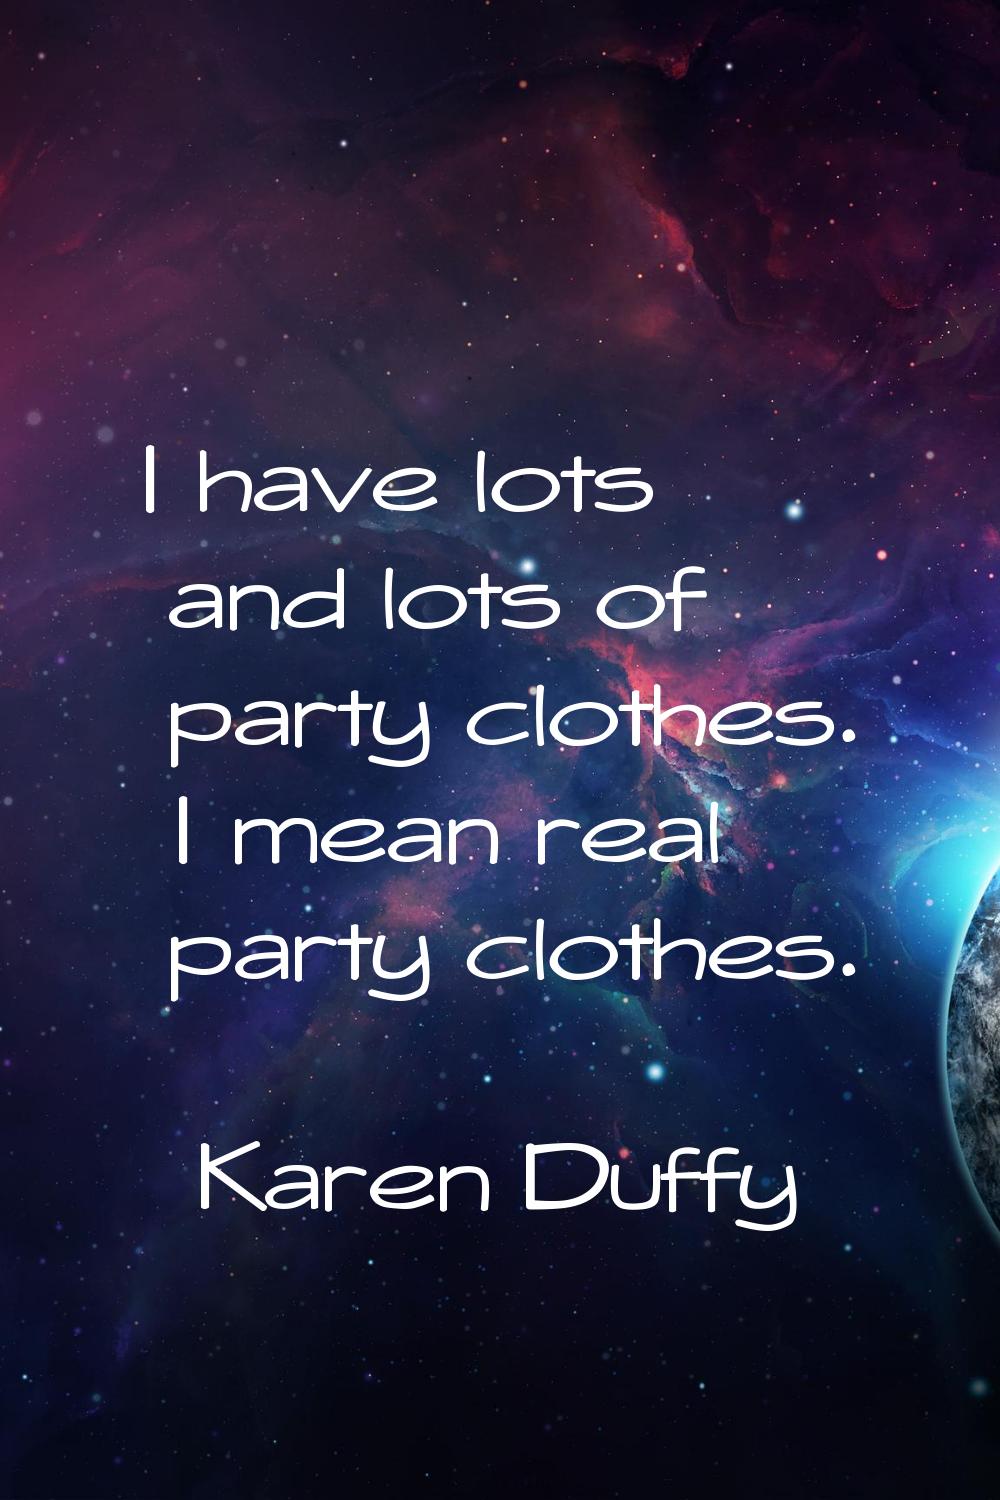 I have lots and lots of party clothes. I mean real party clothes.